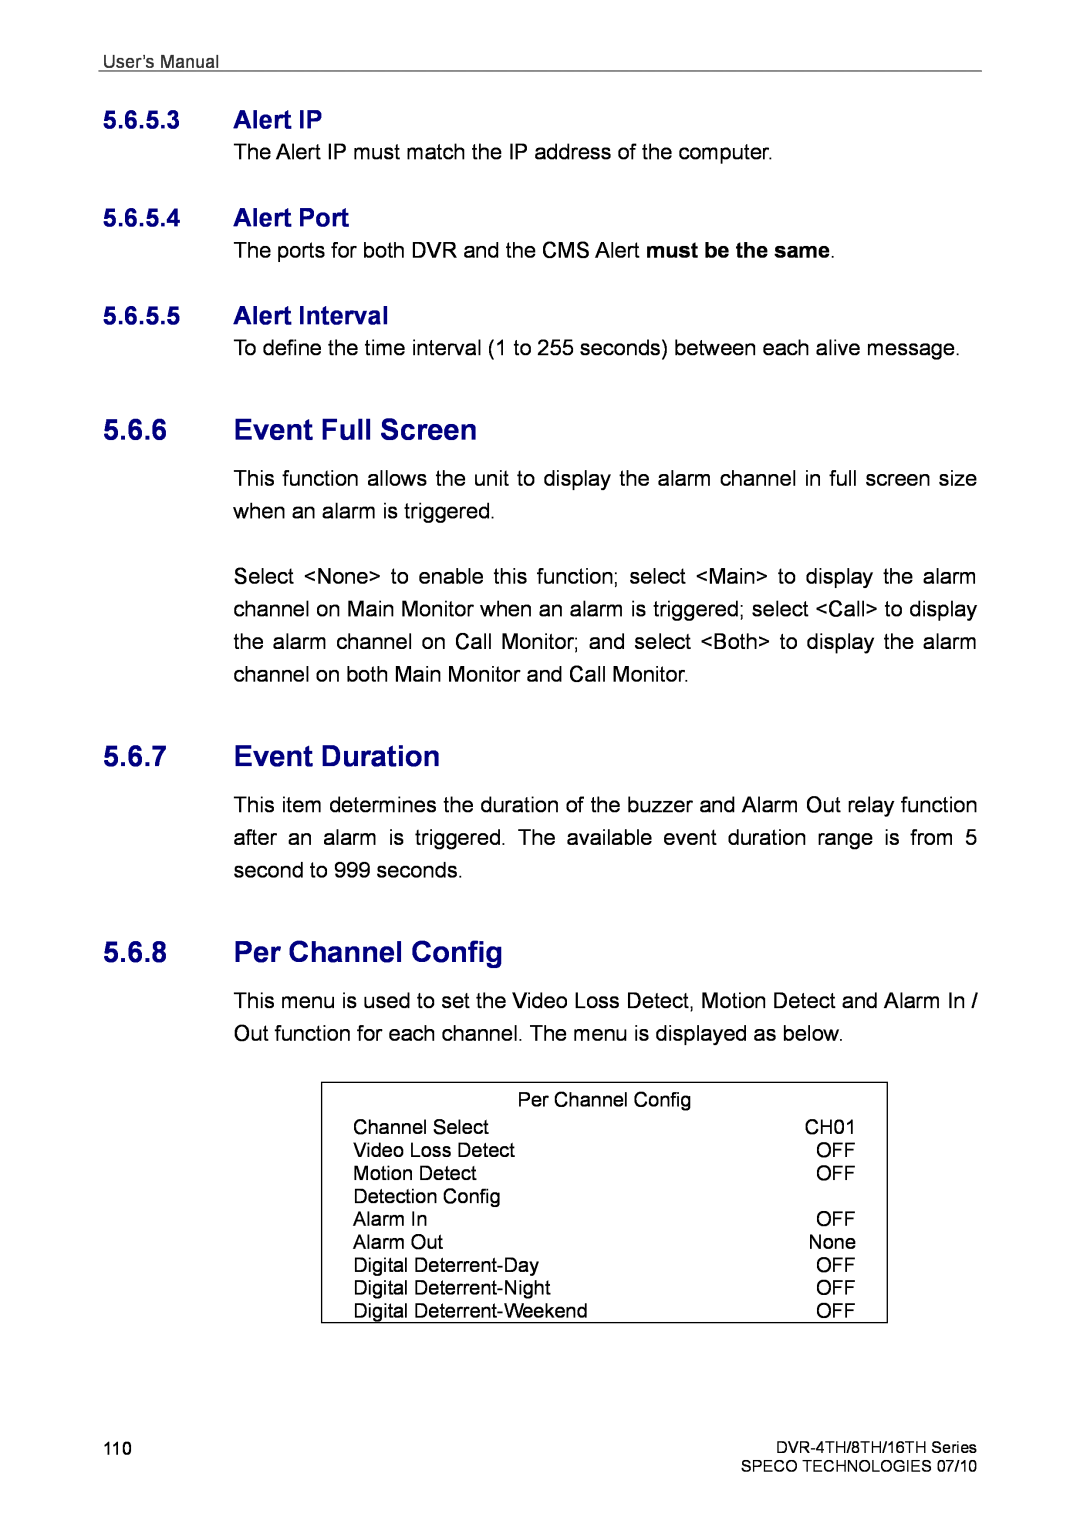 Speco Technologies 8TH, 4TH Event Full Screen, Event Duration, Per Channel Config, Alert IP, Alert Port, Alert Interval 